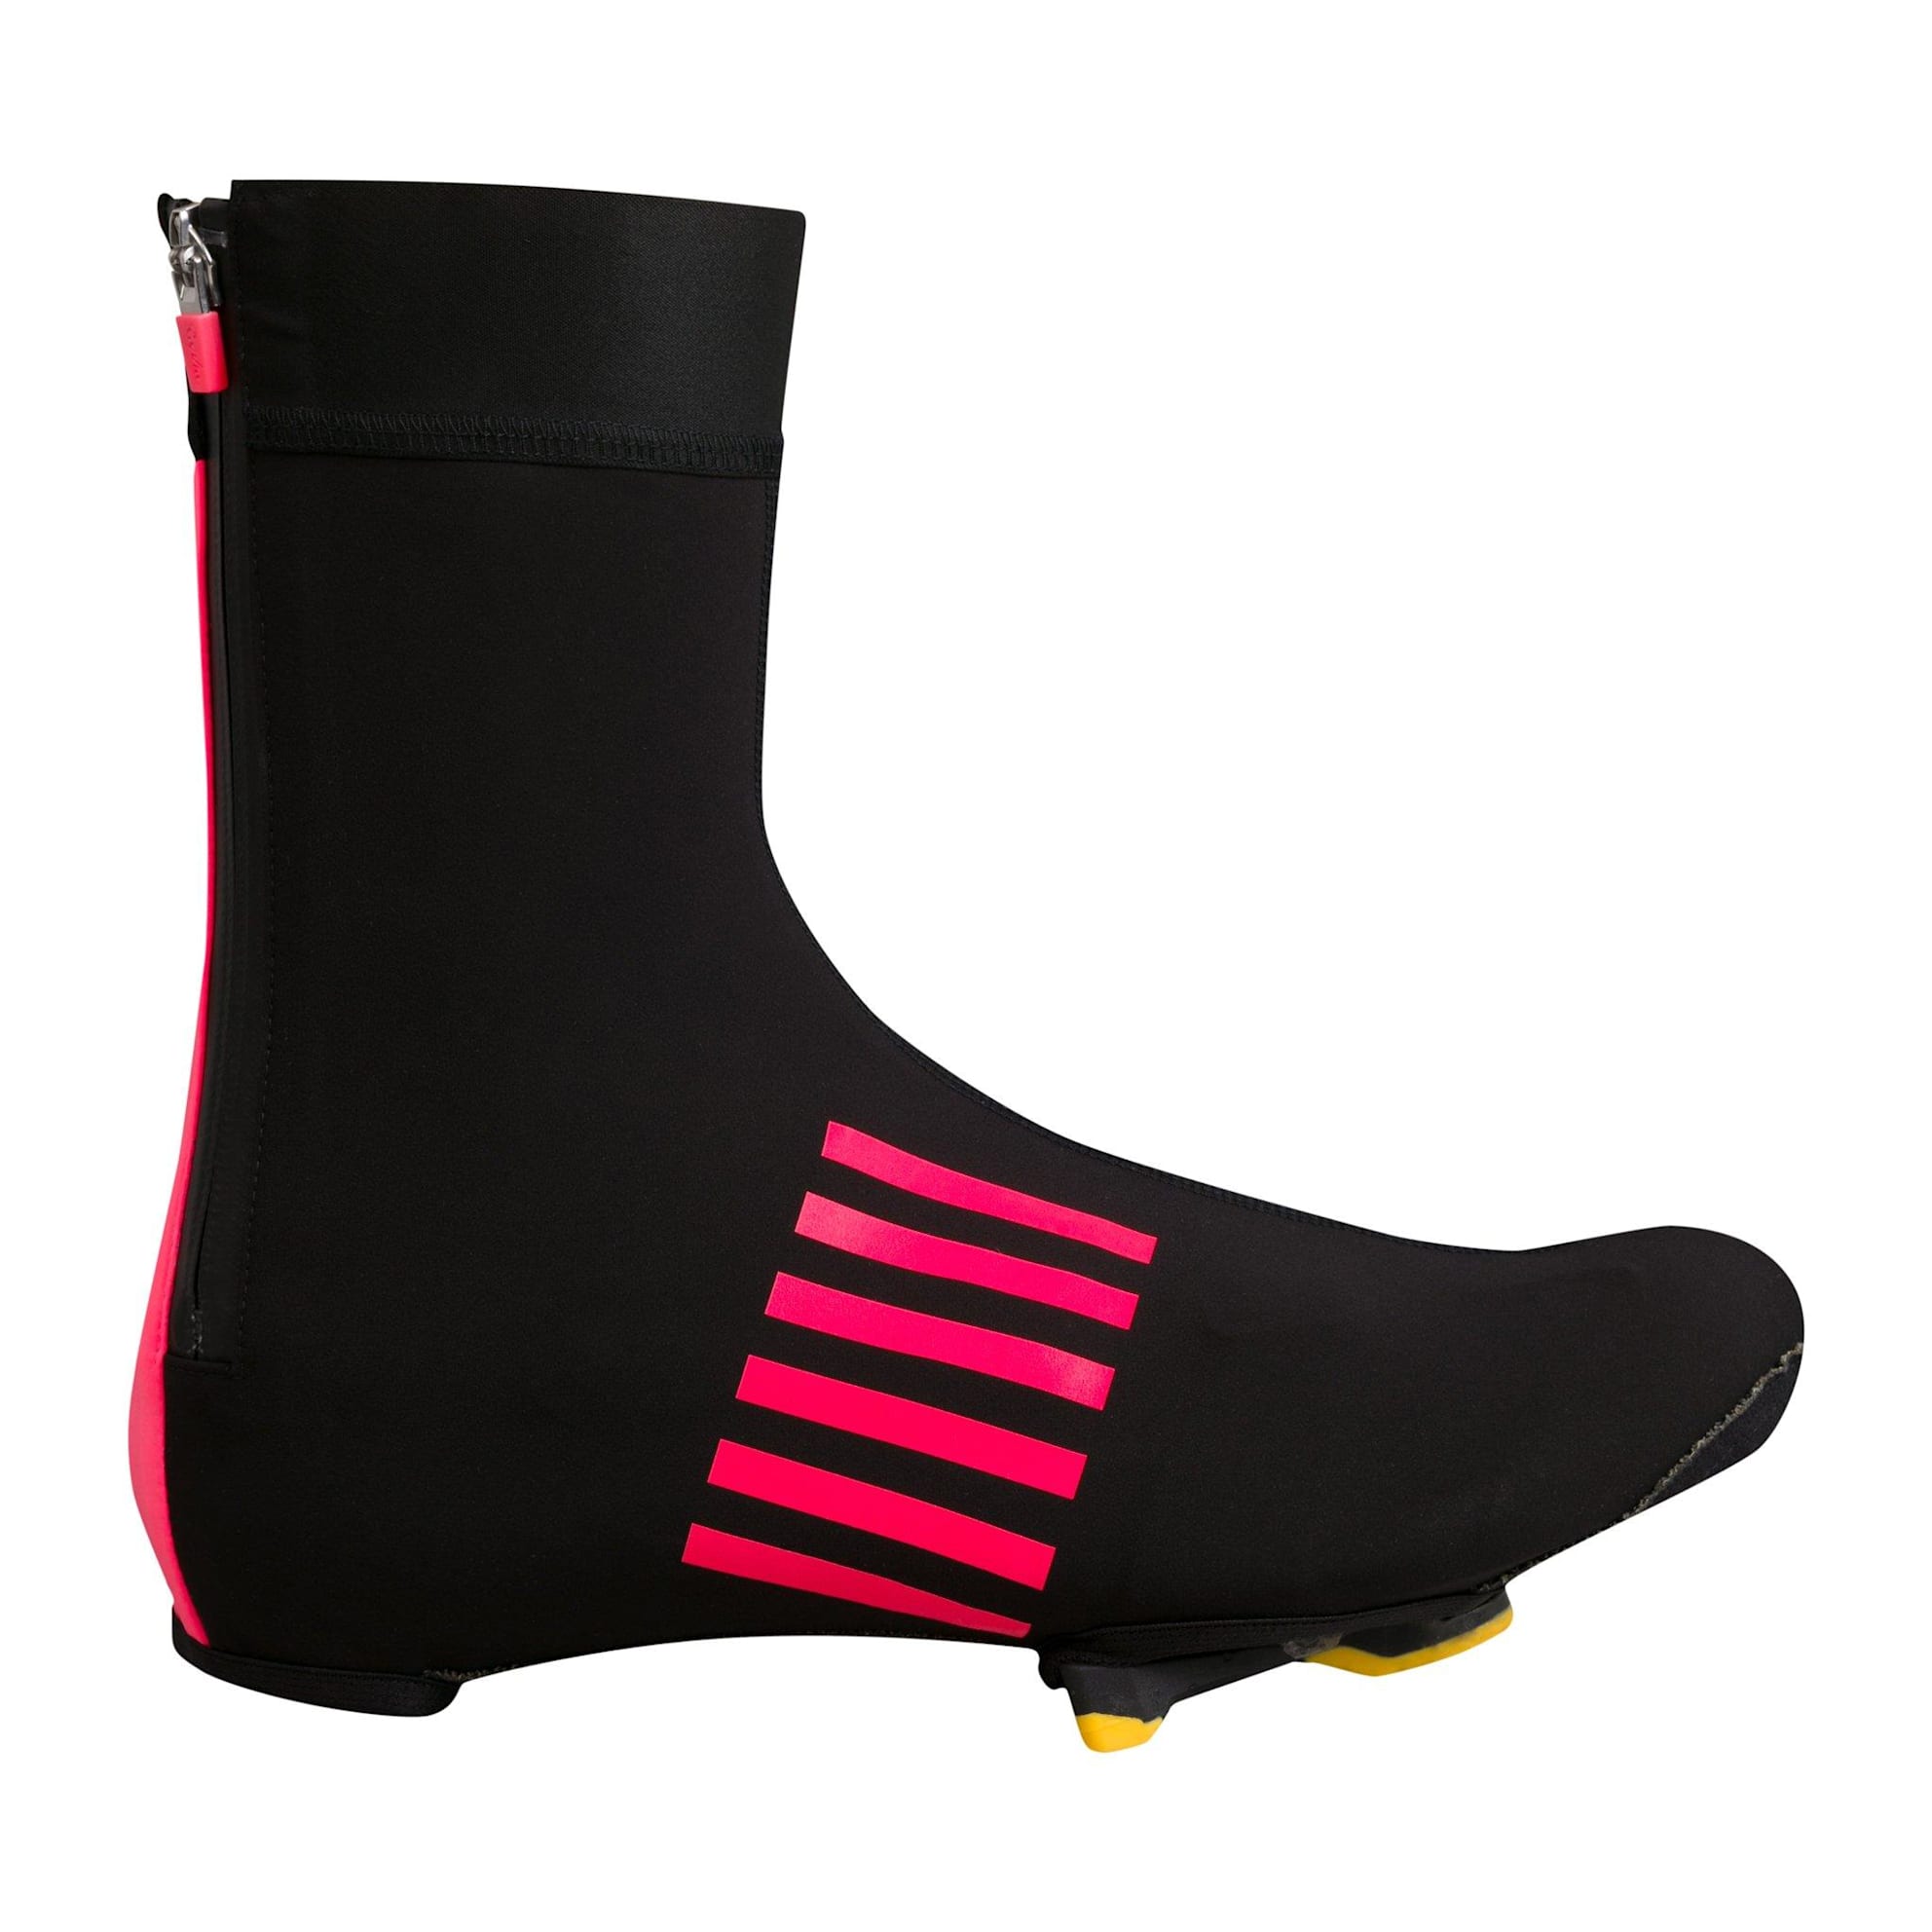 Pro Team Overshoes